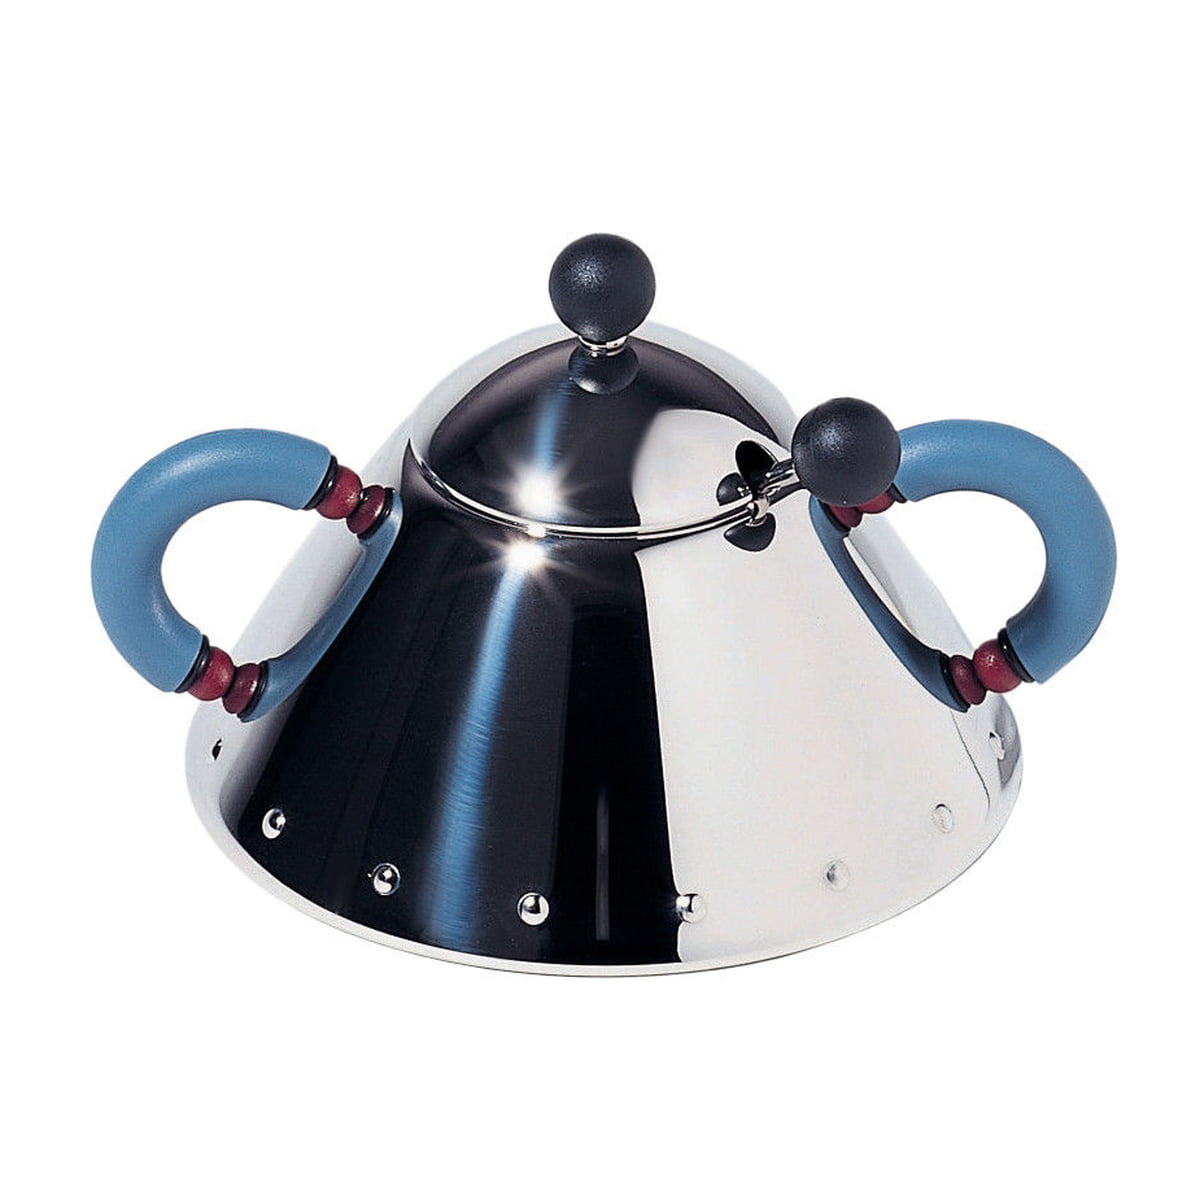 Sugar Bowl 9097 by Alessi in the home design shop